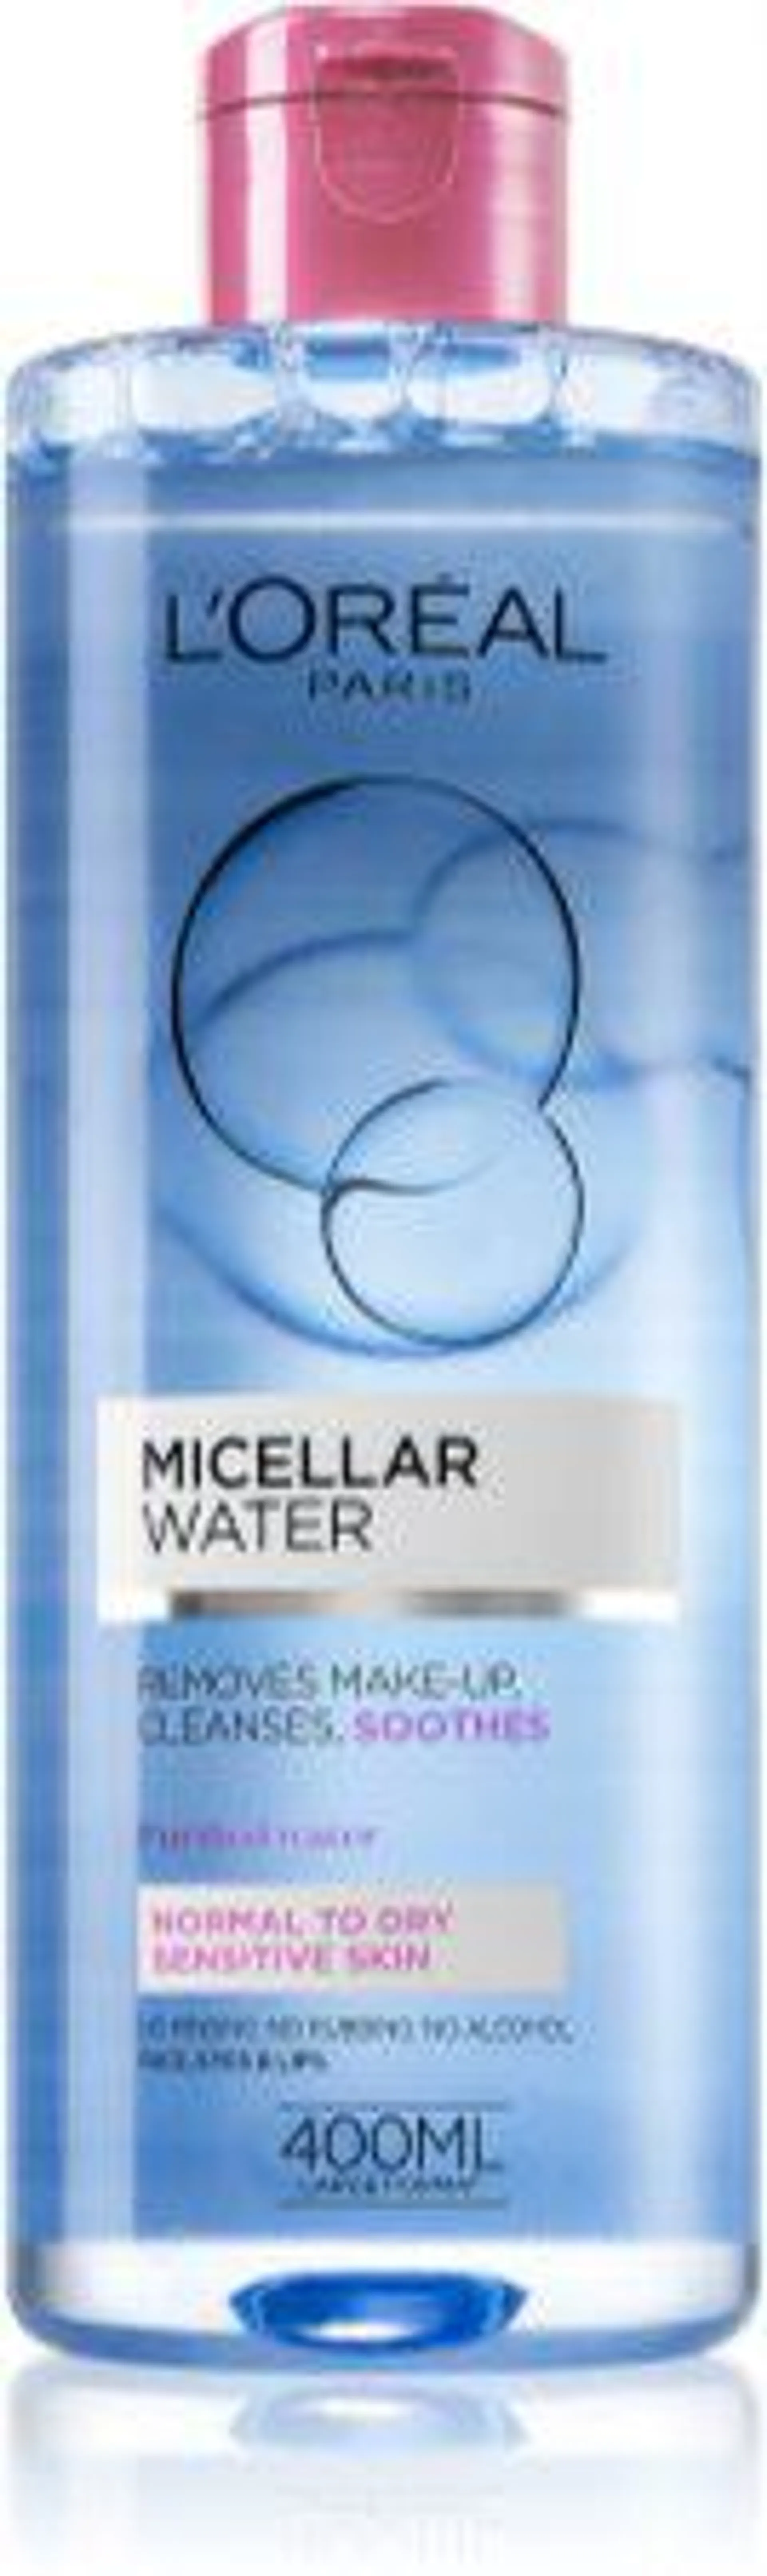 Micellar Water for Normal to Dry and Sensitive Skin